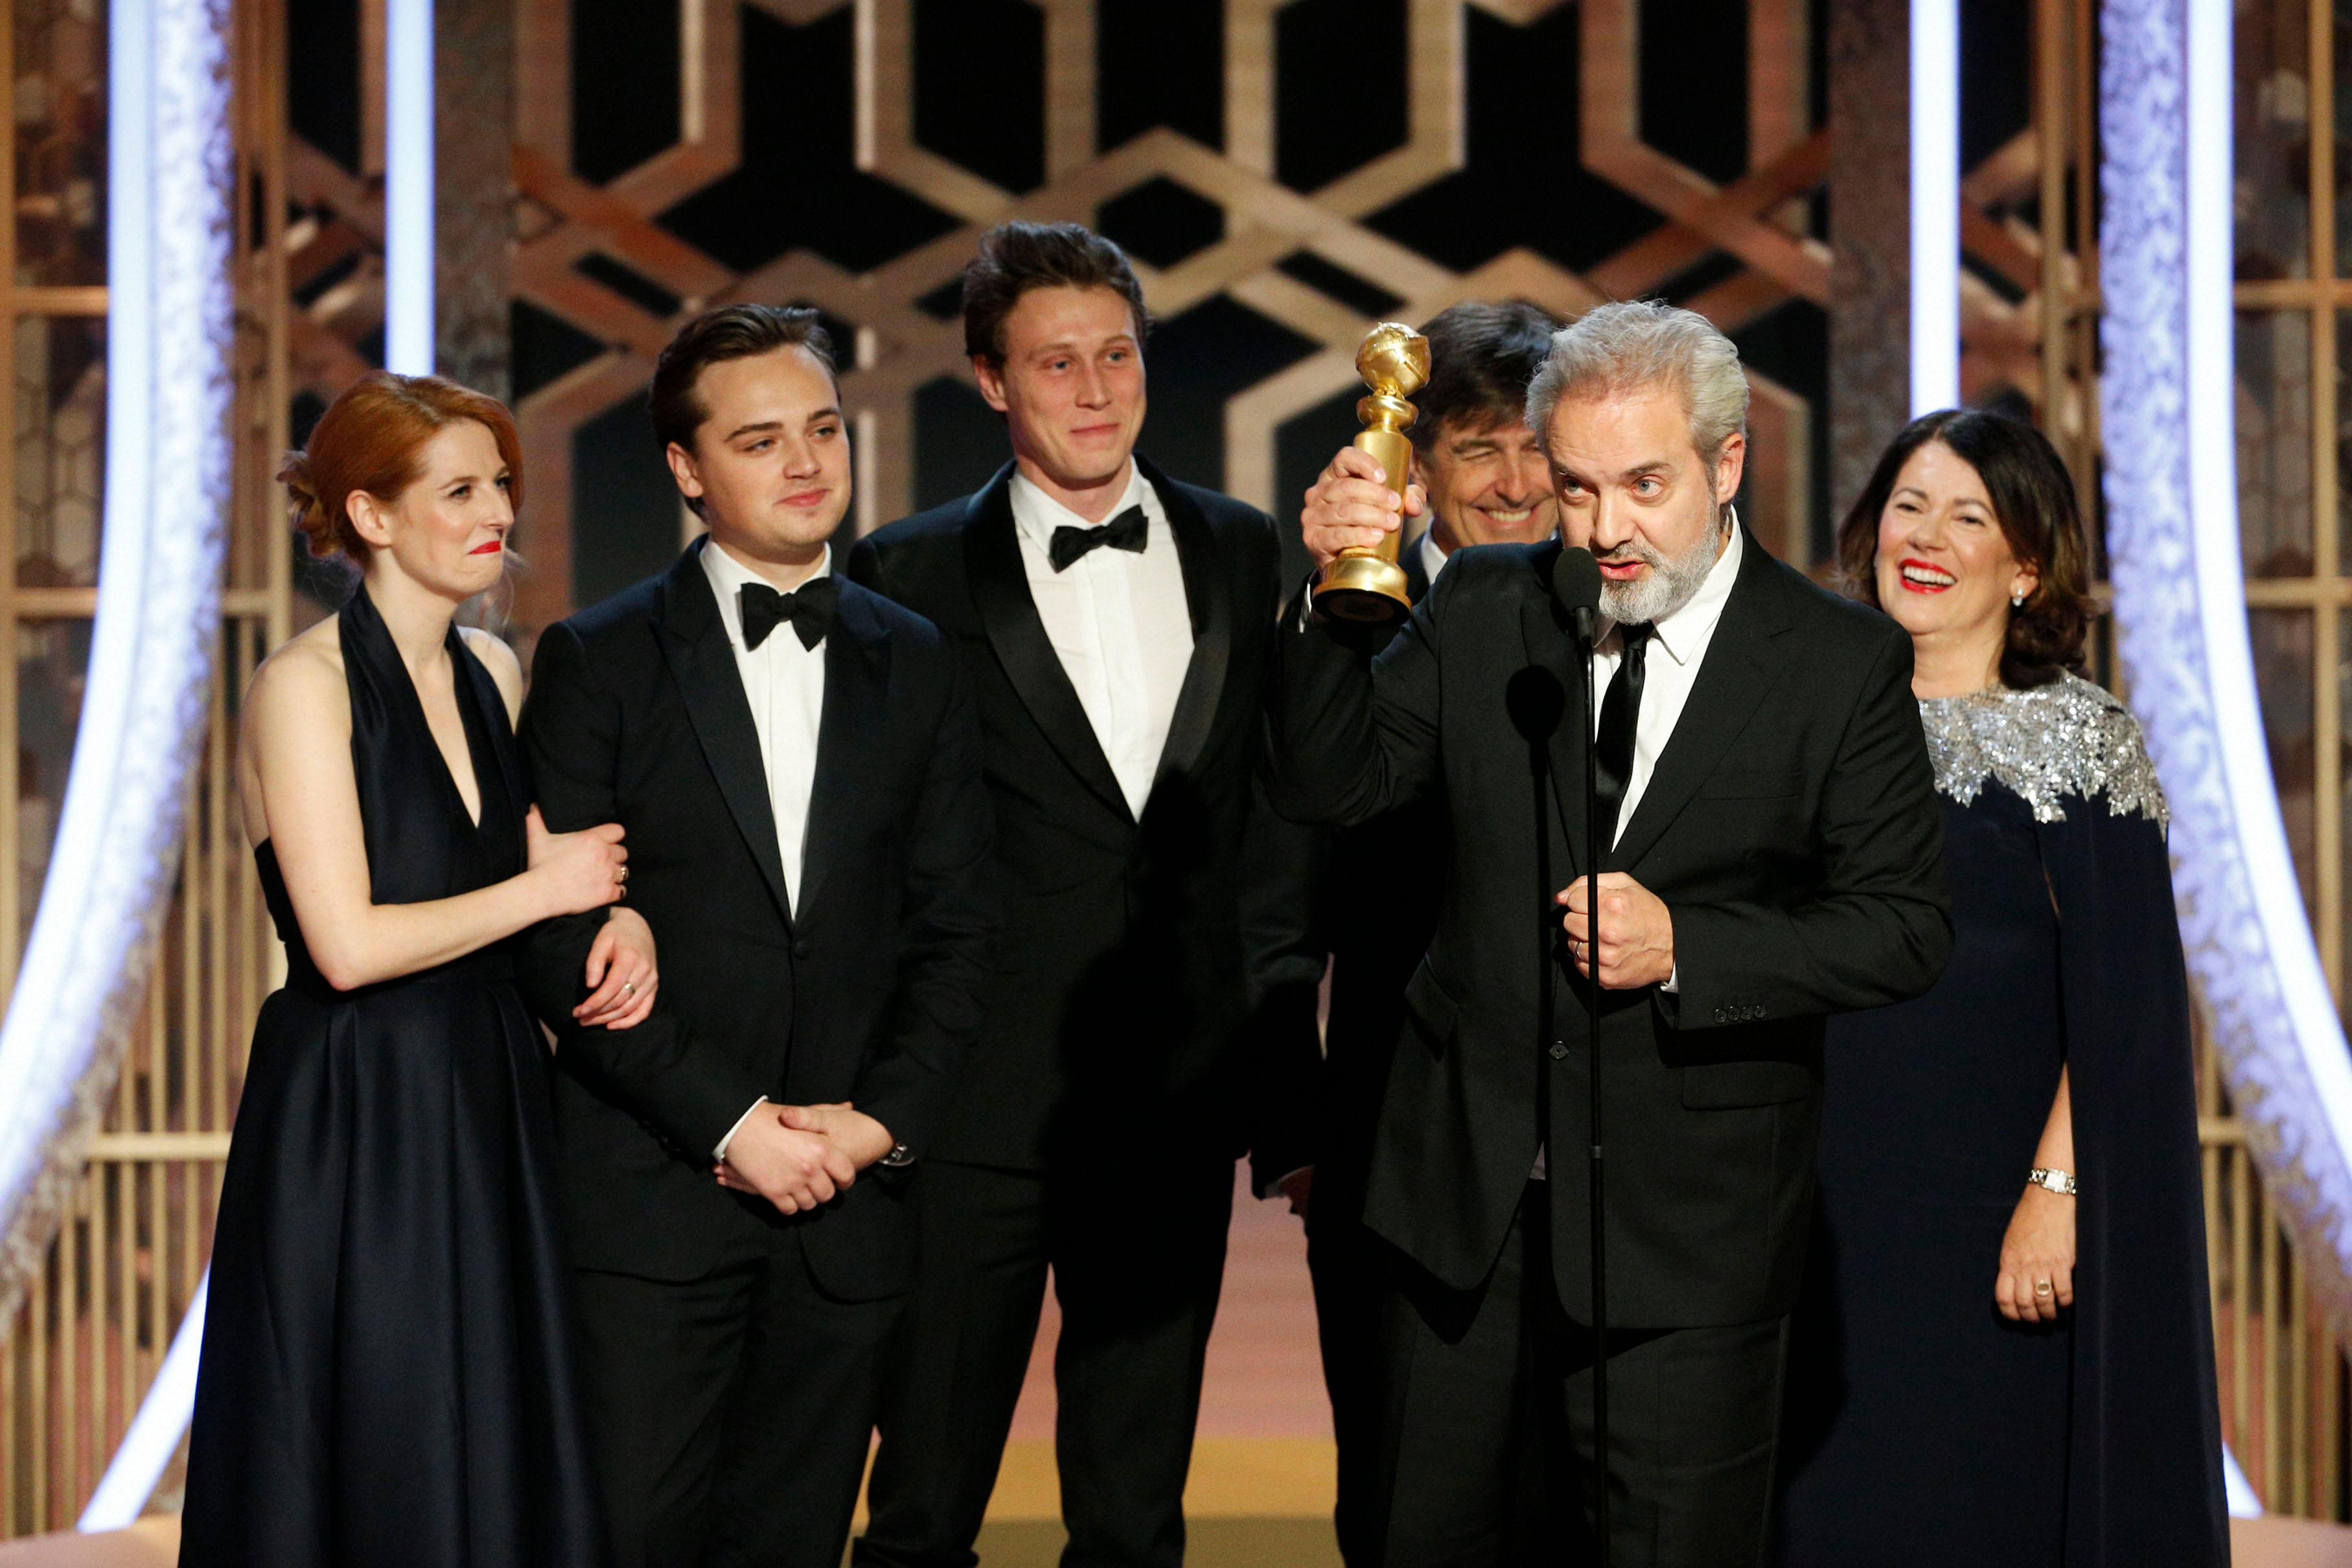 This image released by NBC shows filmmaker Sam Mendes accepting the award for best motion picture drama for "1917" at the 77th Annual Golden Globe Awards at the Beverly Hilton Hotel in Beverly Hills, Calif. (AP Photo)